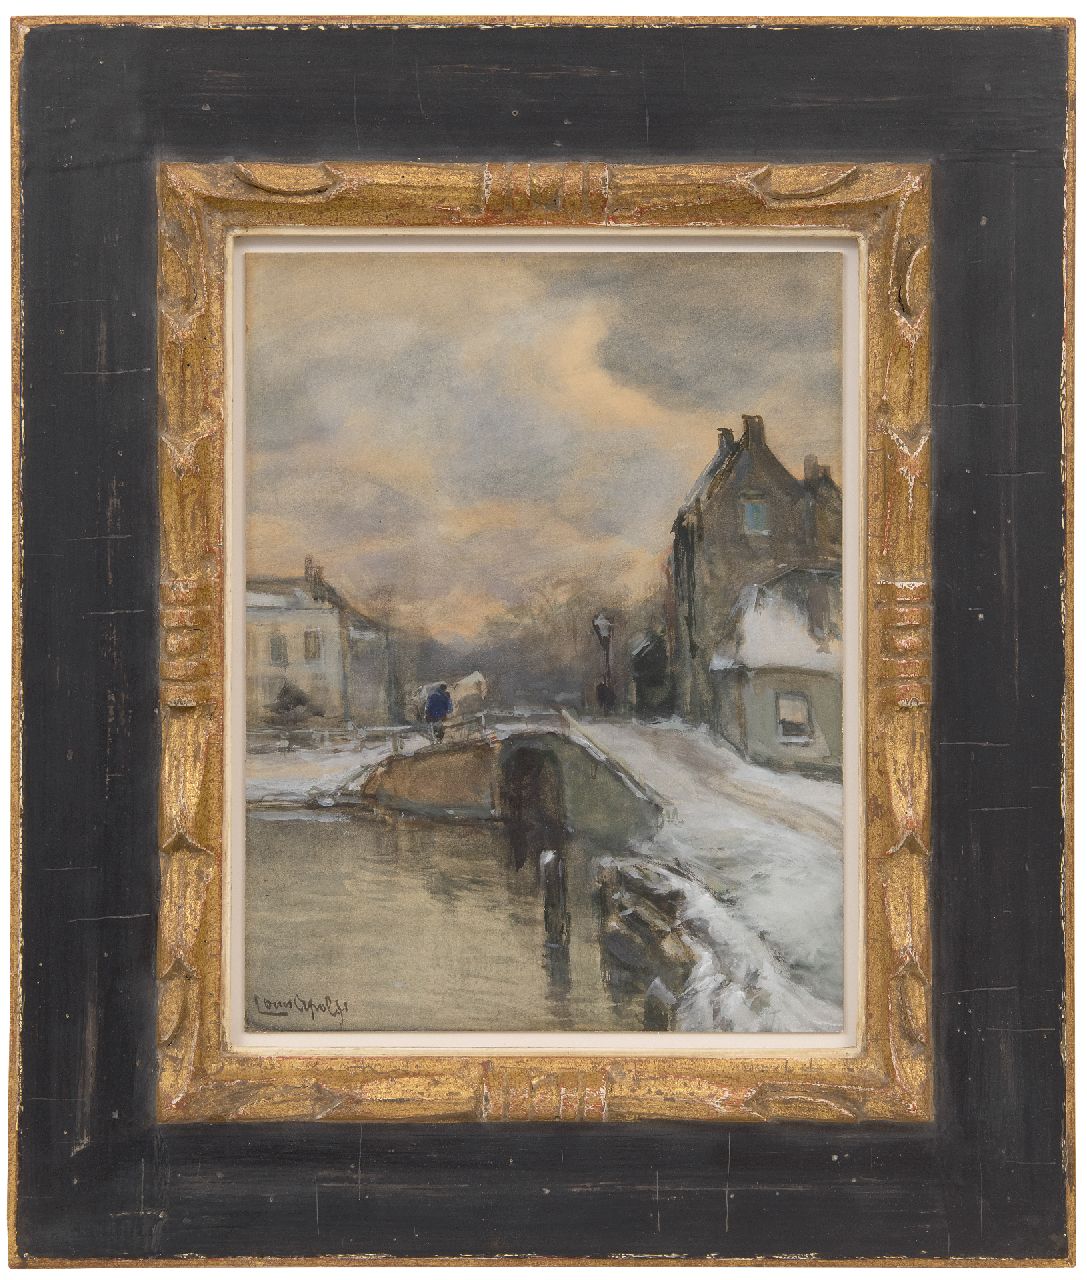 Apol L.F.H.  | Lodewijk Franciscus Hendrik 'Louis' Apol | Watercolours and drawings offered for sale | Dutch village canal in the snow, watercolour on paper laid down on board 28.7 x 22.1 cm, signed l.l.